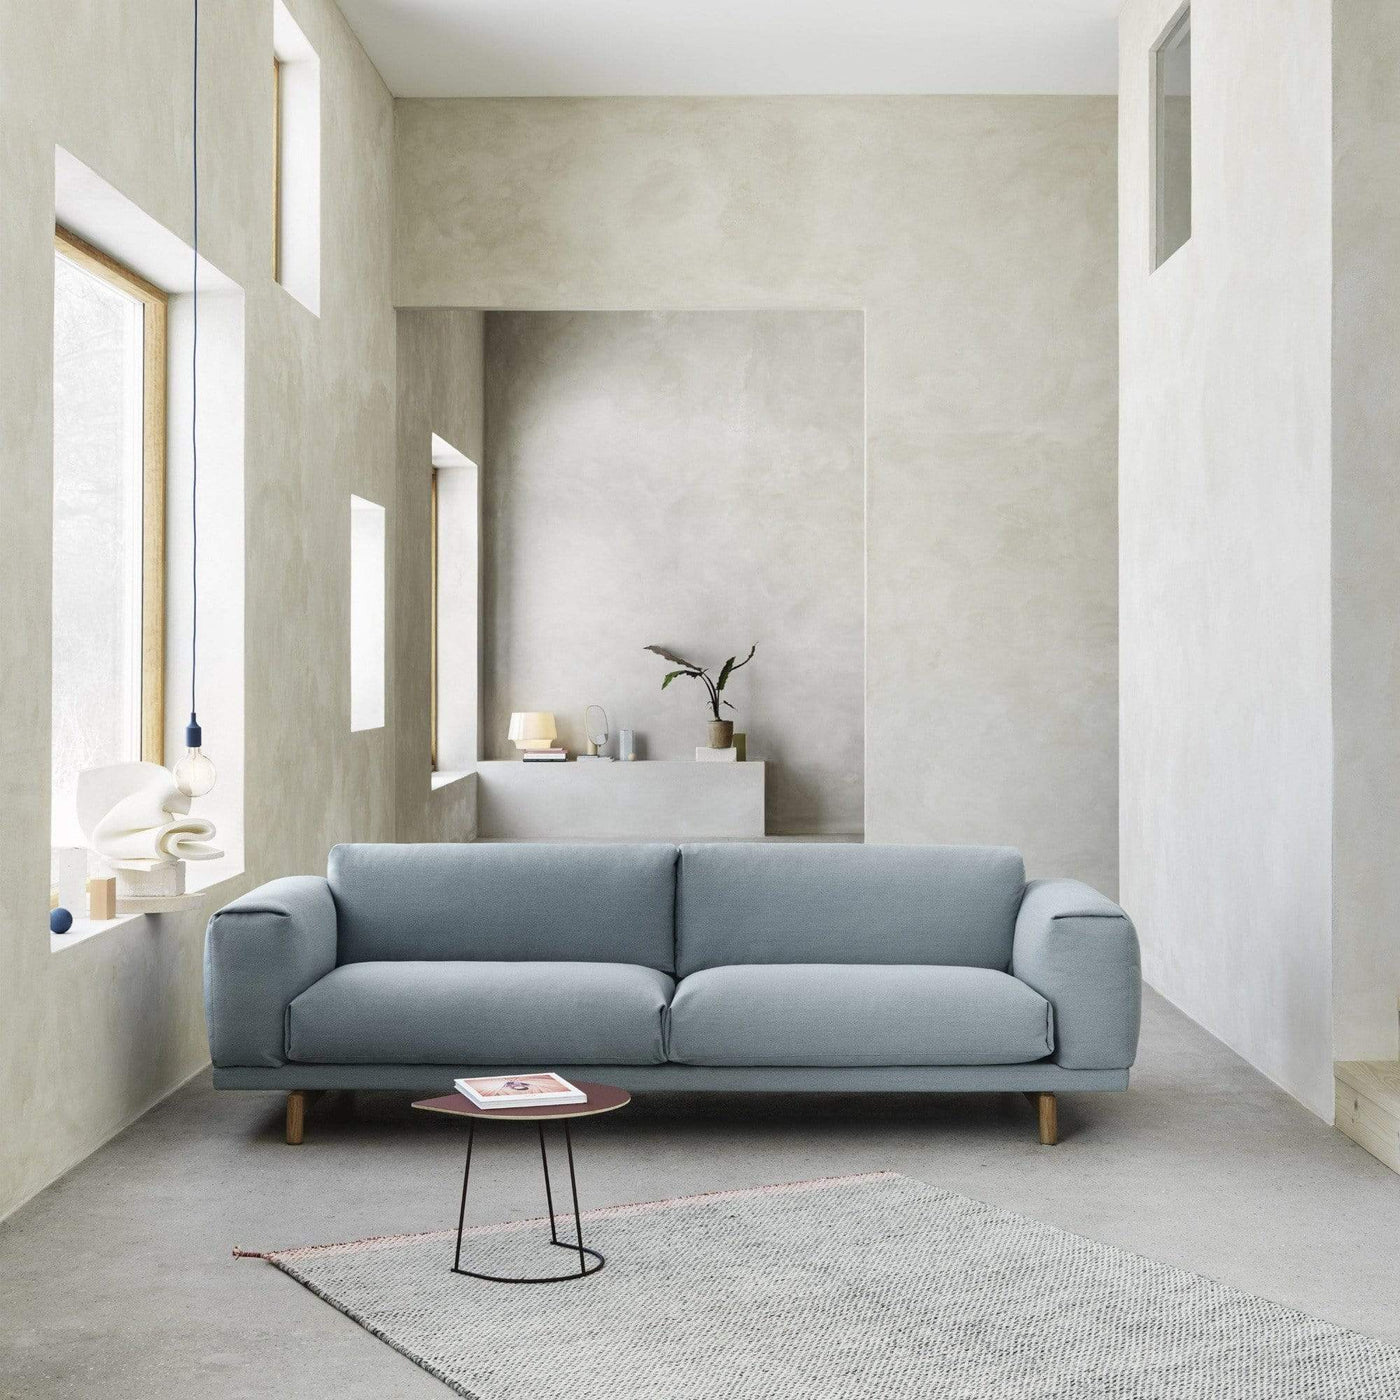 Muuto Rest 3 seater sofa, made to order from someday designs. #colour_steelcut-trio-713-blue